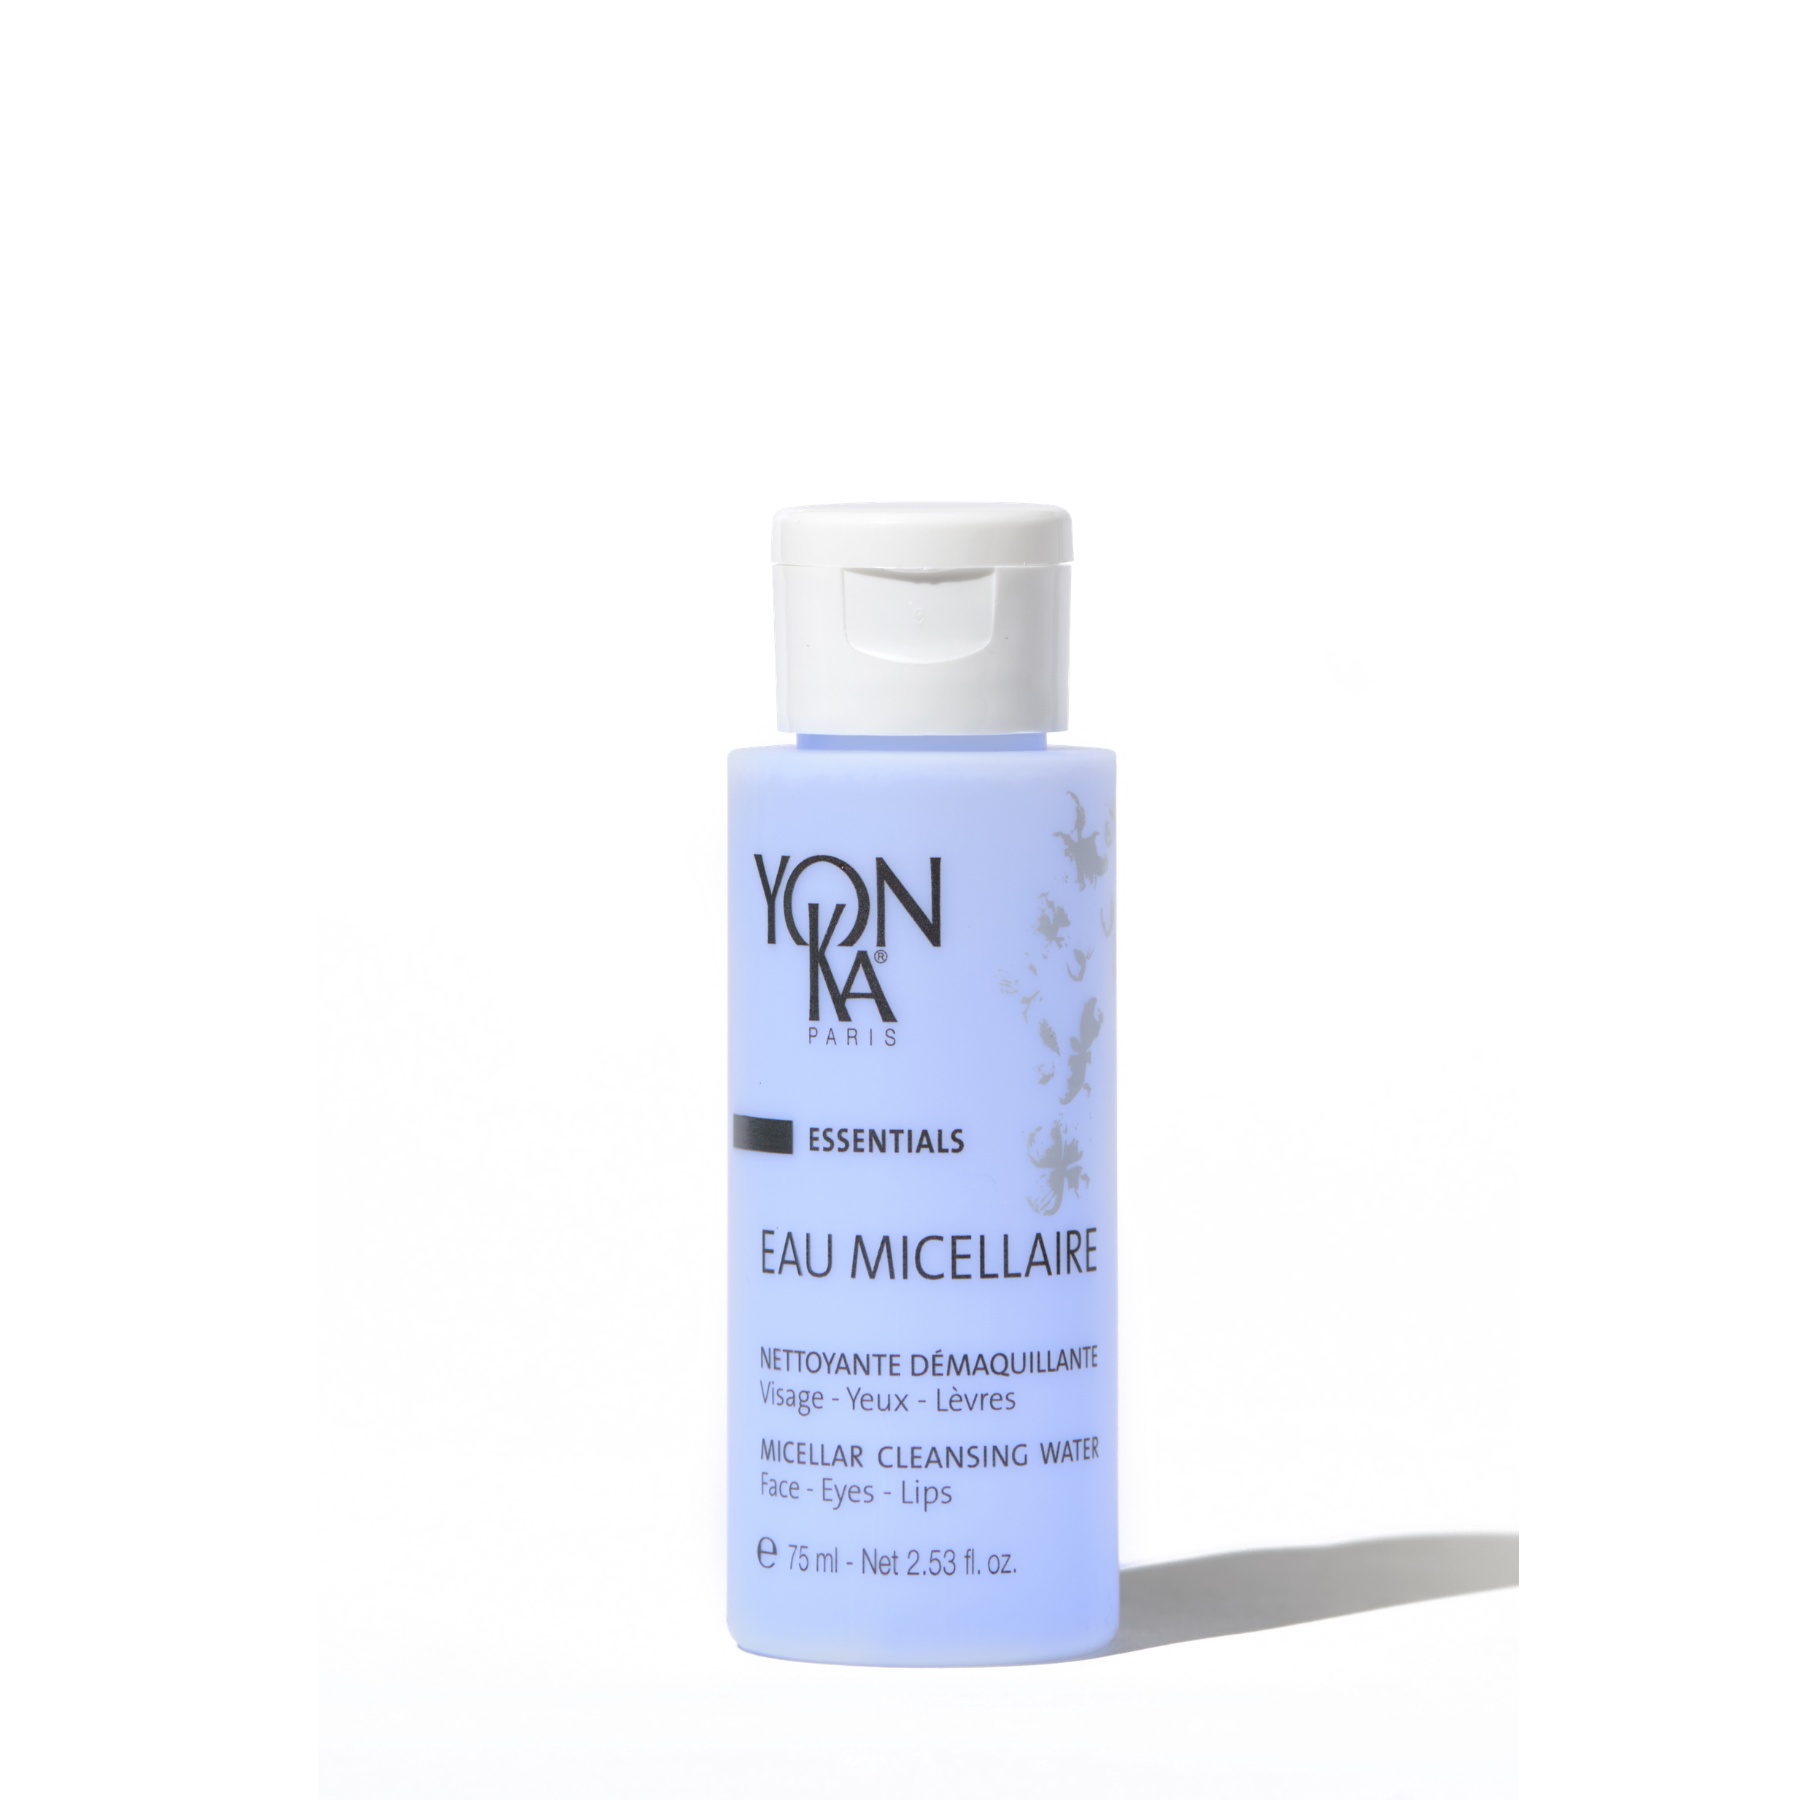 Yonka Eau Micellaire Micellar Cleansing Water - Travel Size